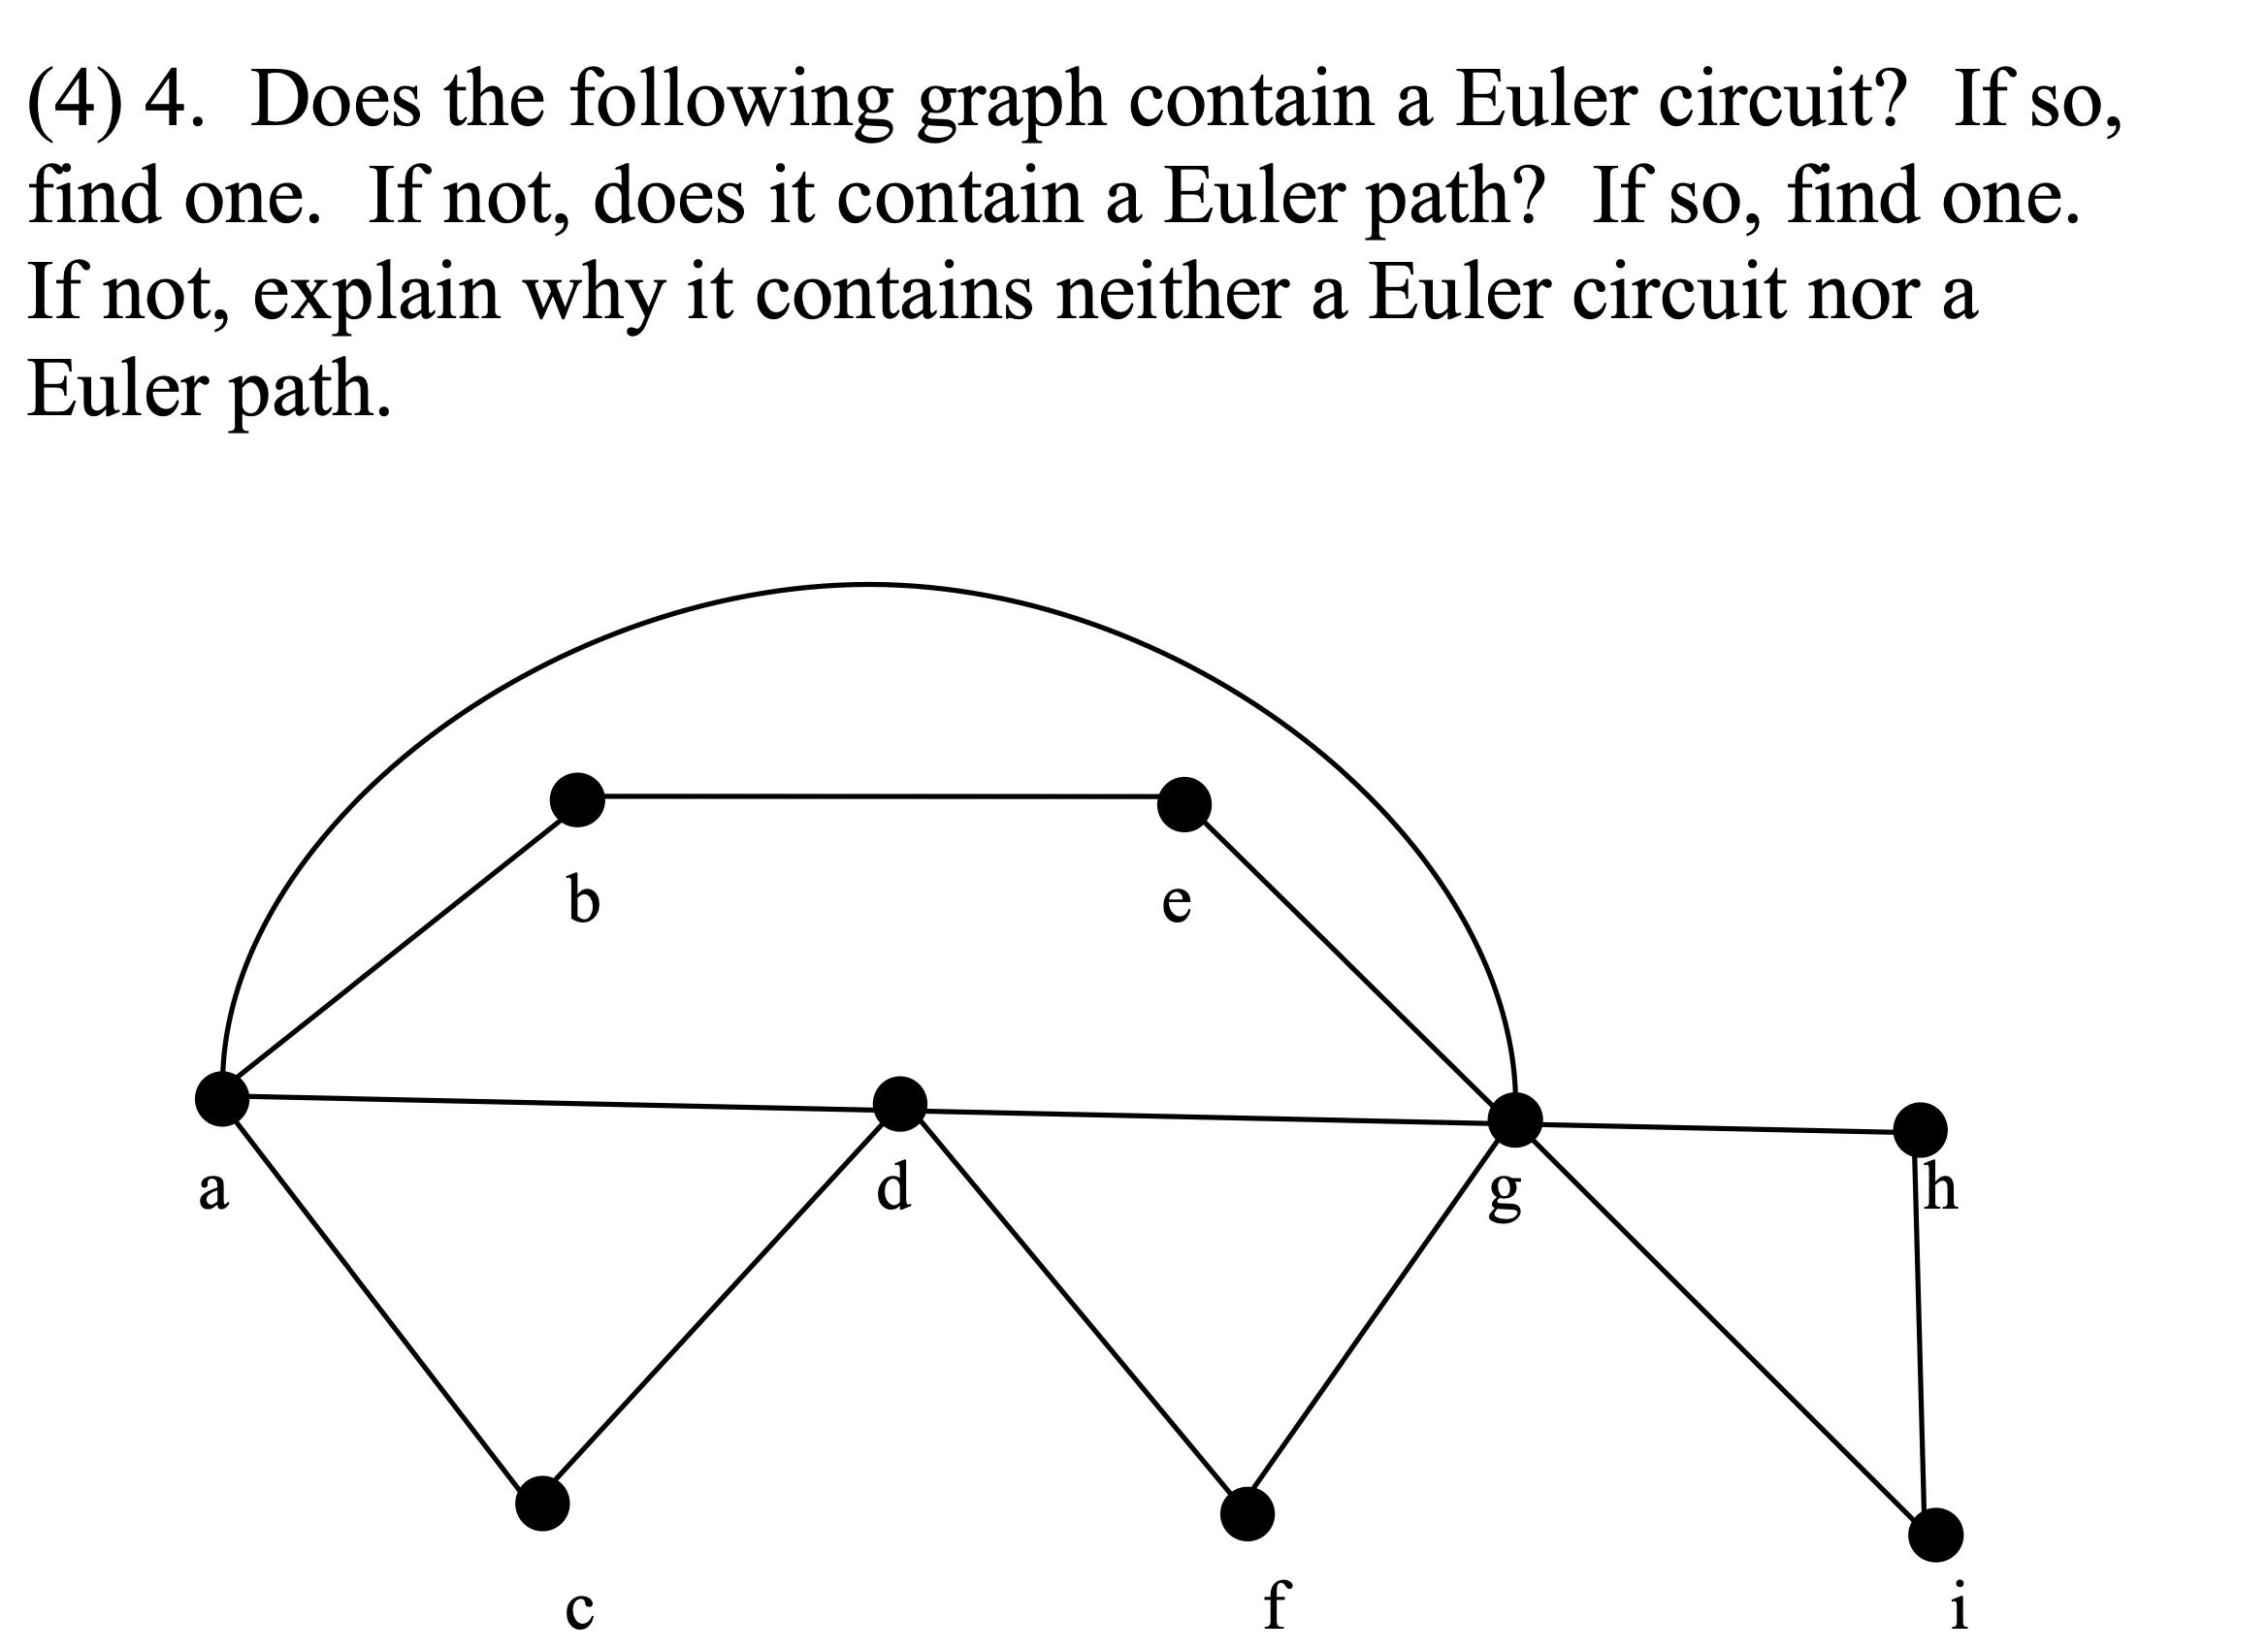 (4) 4. Does the following graph contain a Euler circuit? If so, find one. If not, does it contain a Euler